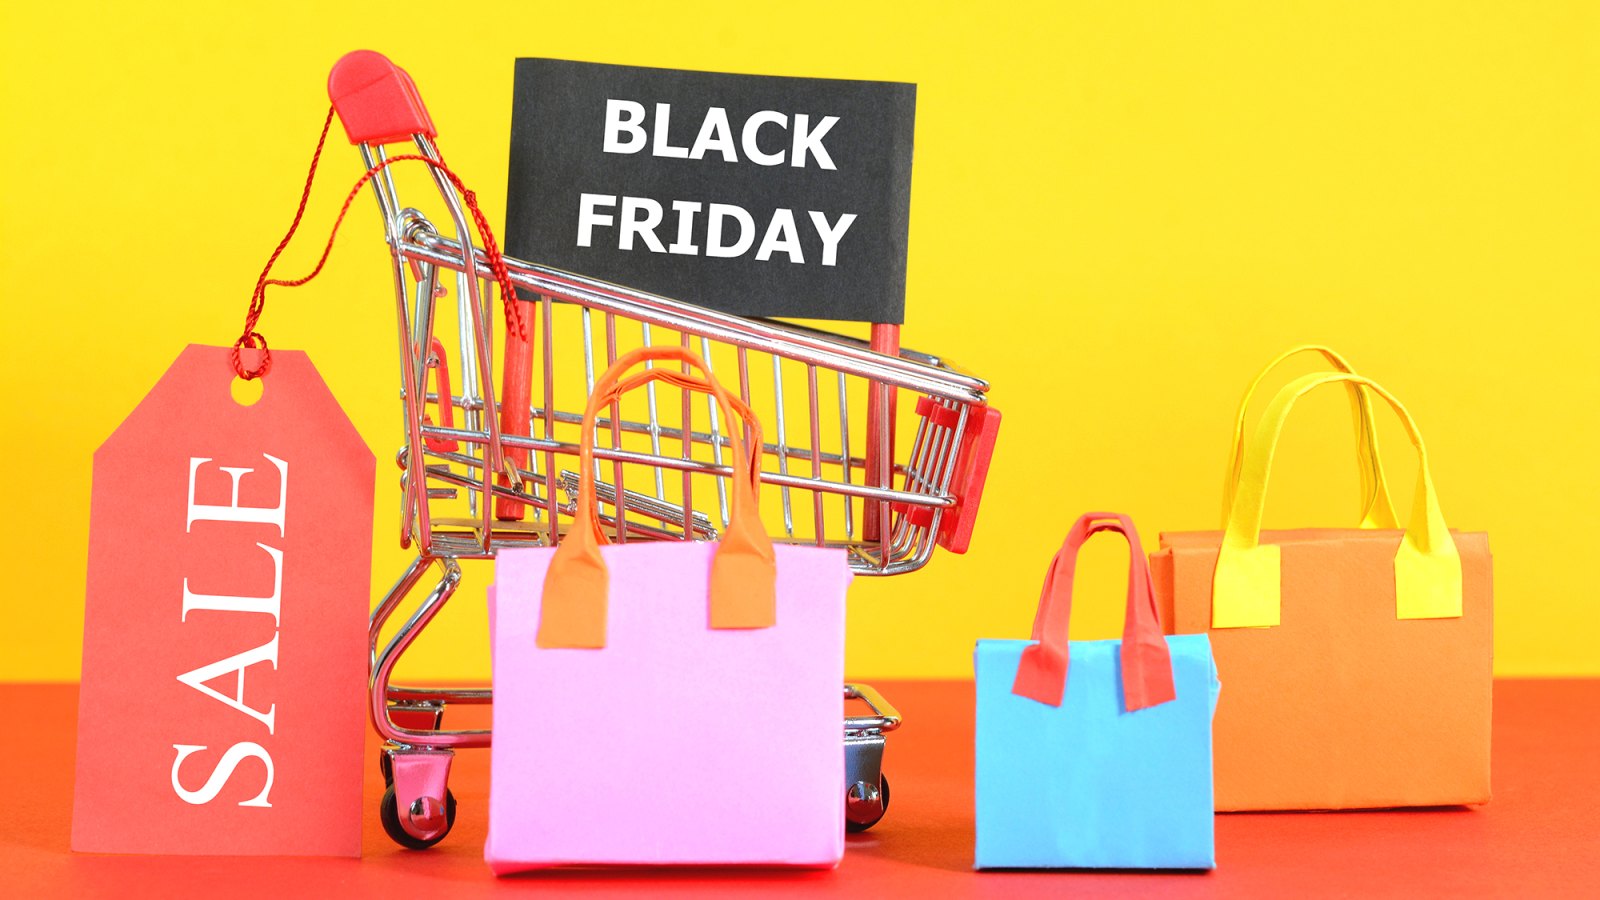 Black Friday Sale concept. Black Friday Sale text on black banner on a shopping cart with colorful shopping bags.